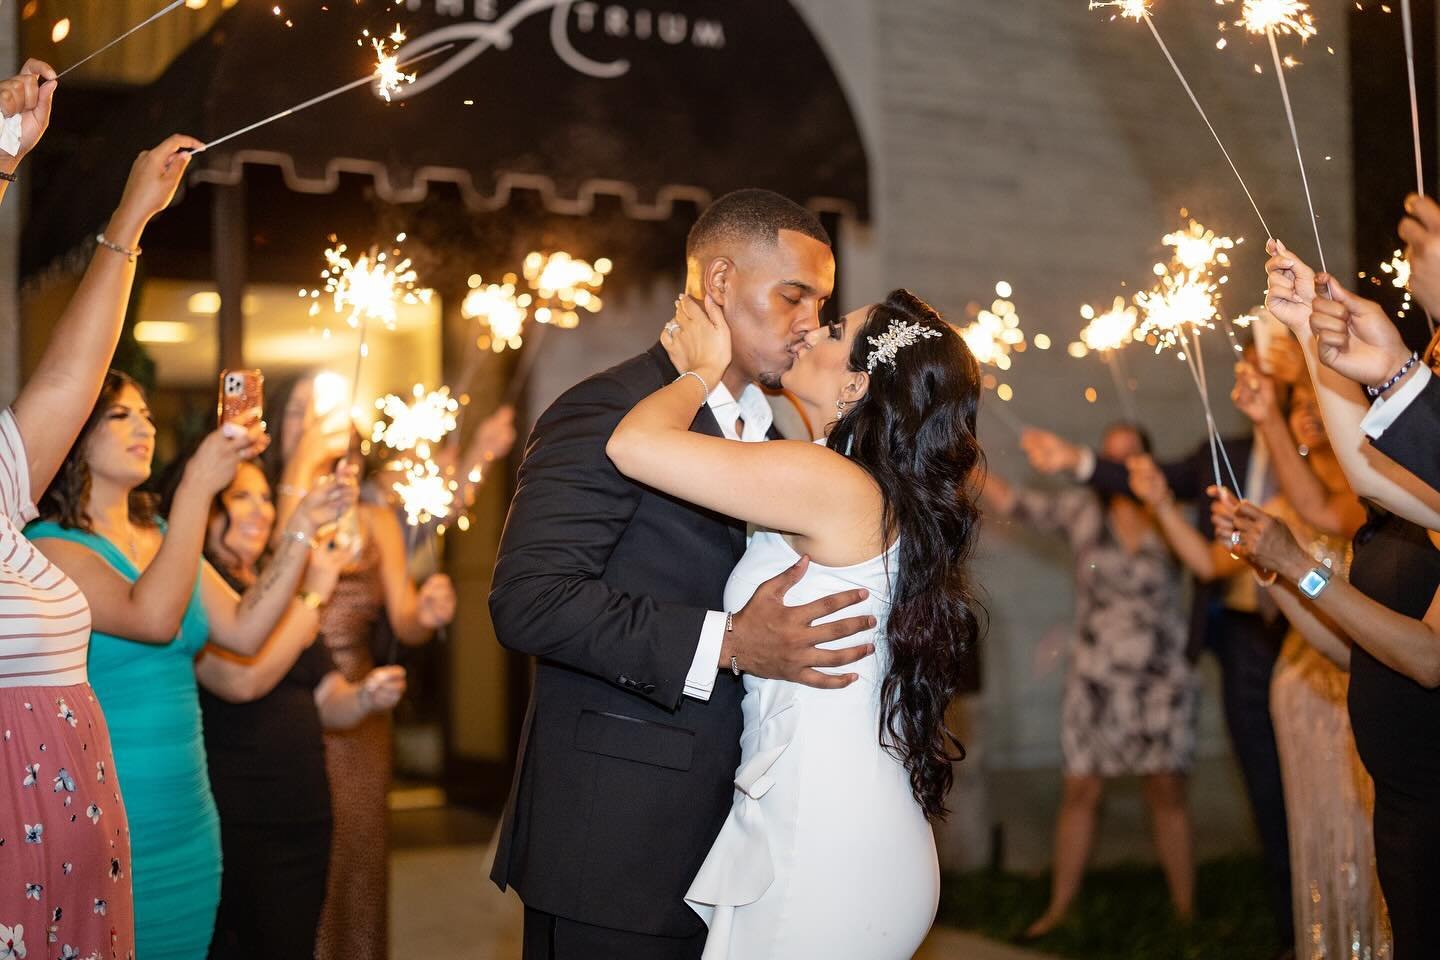 ✨ Sparks fly as love lights up The Atrium! ✨ Celebrating unforgettable moments like this sparkler exit with our beautiful newlyweds. 💕 #TheAtriumWeddings #SparksFly #WeddingSparklers

Photo: @heartbrave_studios 
Venue: @the_atrium
Floral + Decor: @a